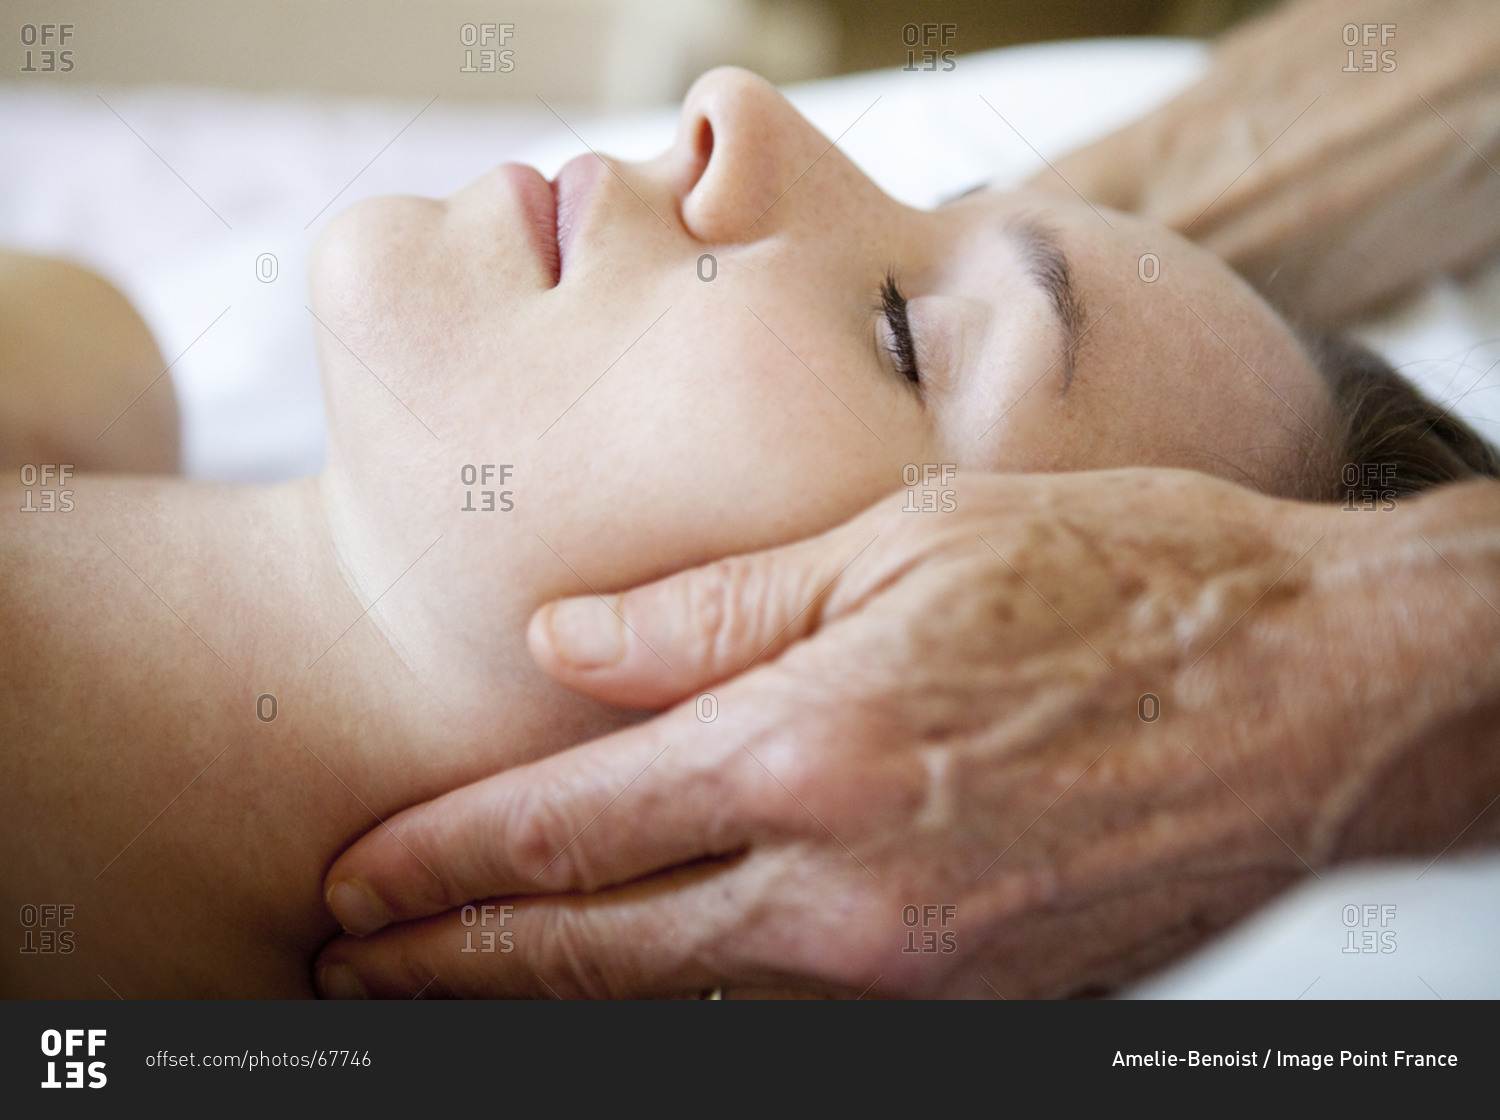 A patient is given a Tao Thai massage